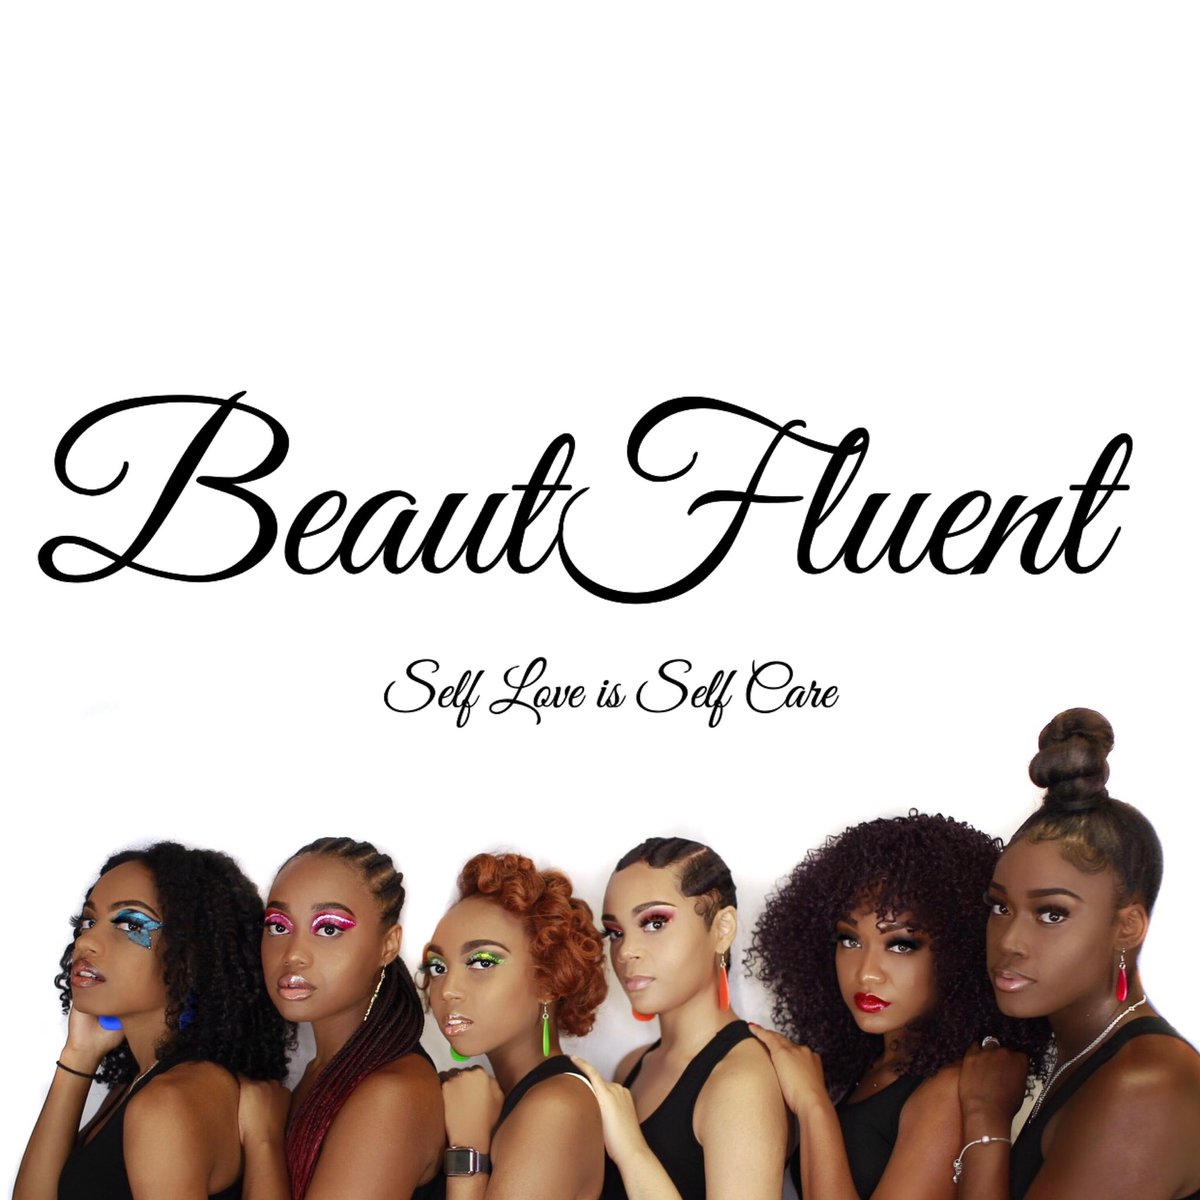 Hey it’s Brianna Yvette! I’m a 20 year old makeup artist and hairstylist from Chicago! I’ve recently launching a model agency so now I’ll be introducing you all to my models! Stay tuned to this thread and follow our Instagram@ beautfluent_llc